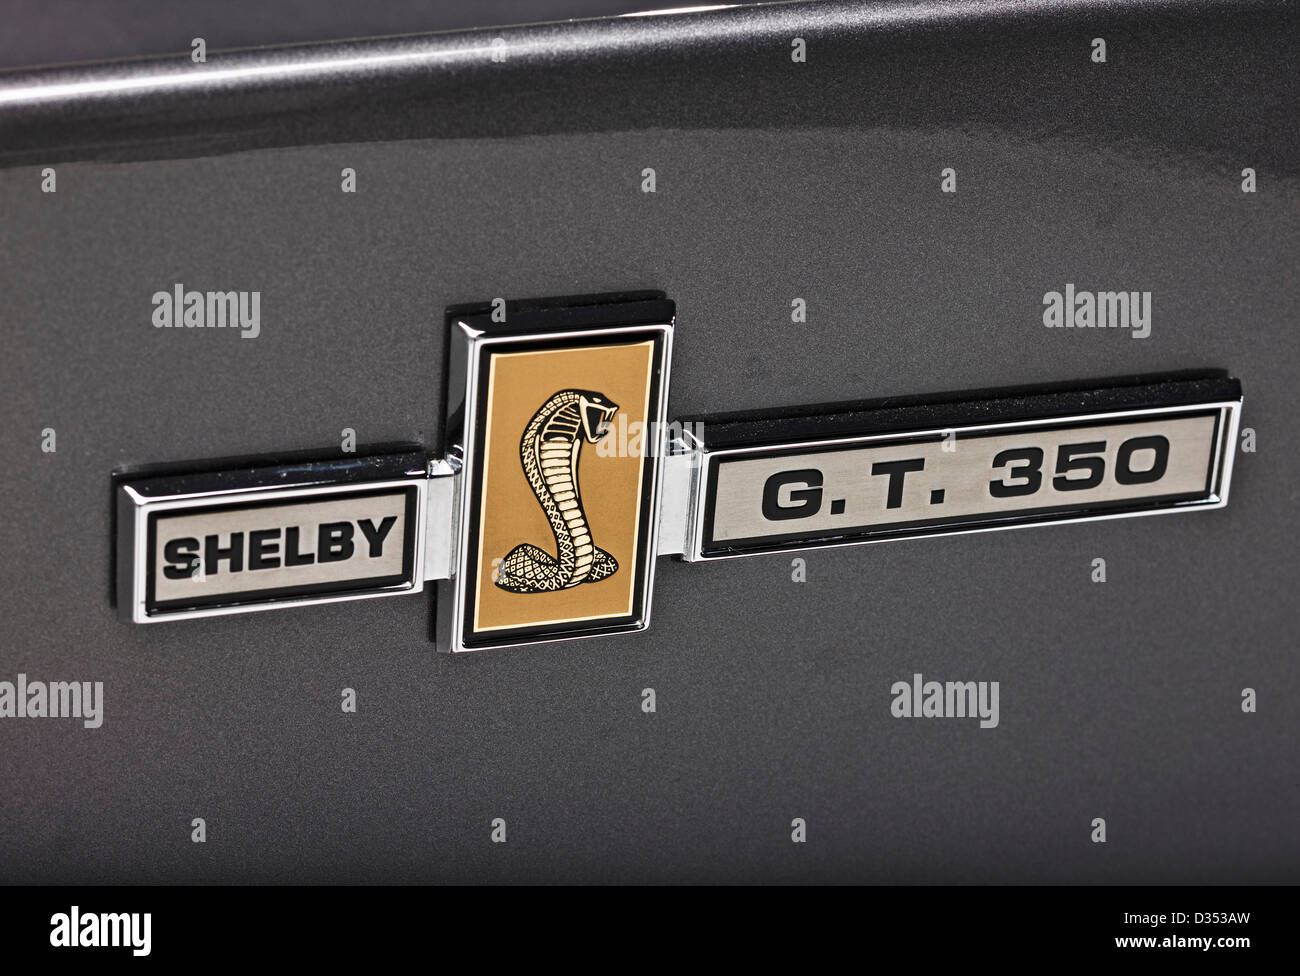 Shelby Mustang GT350 logo and insignia Stock Photo